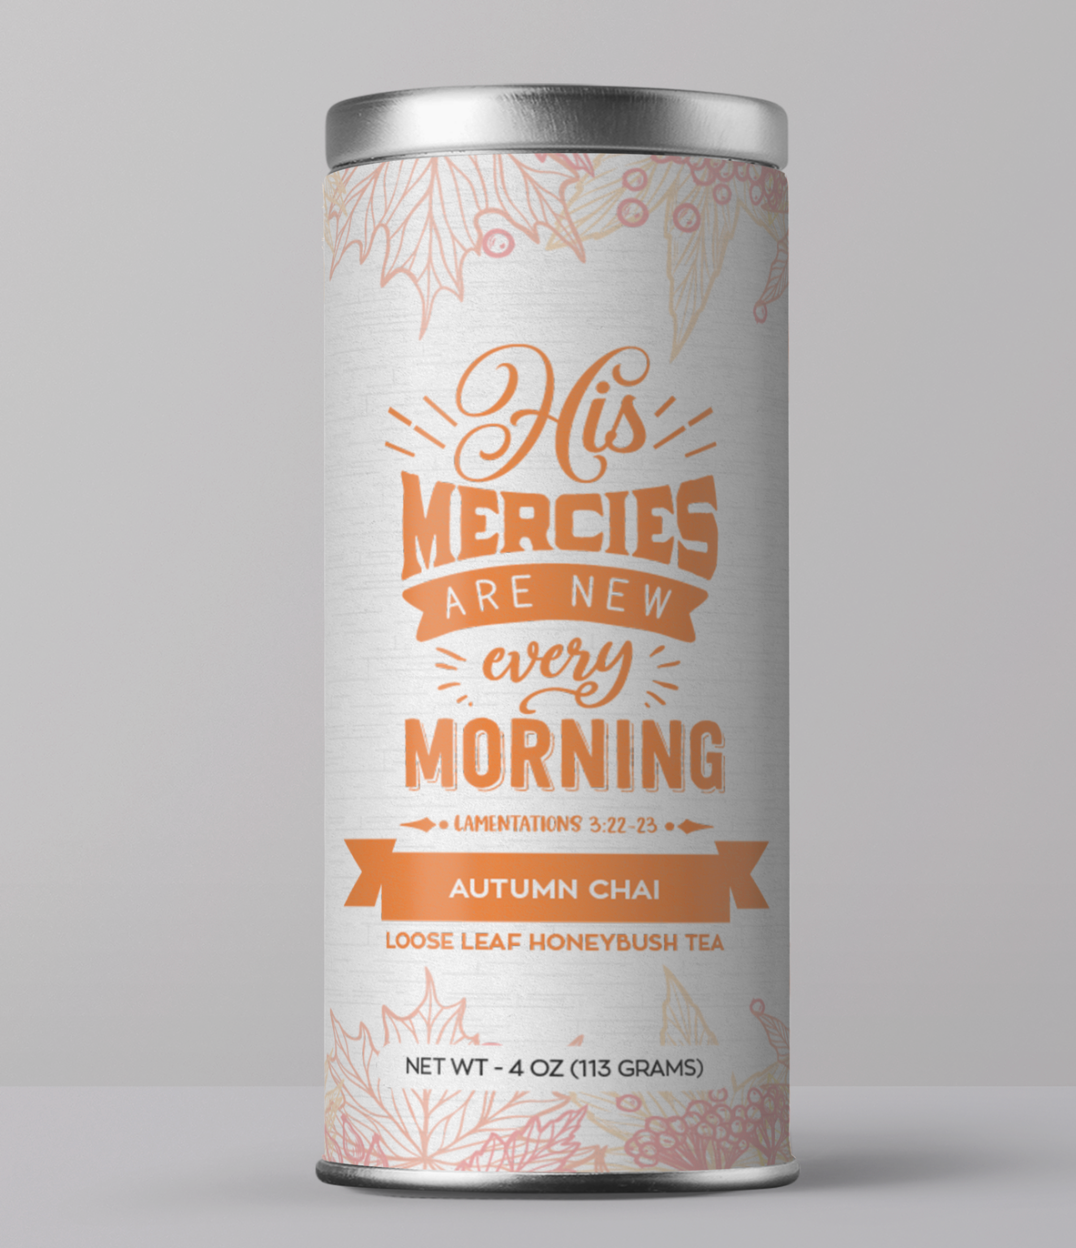 "His Mercies Are New Every Morning" - Autumn Chai Tea